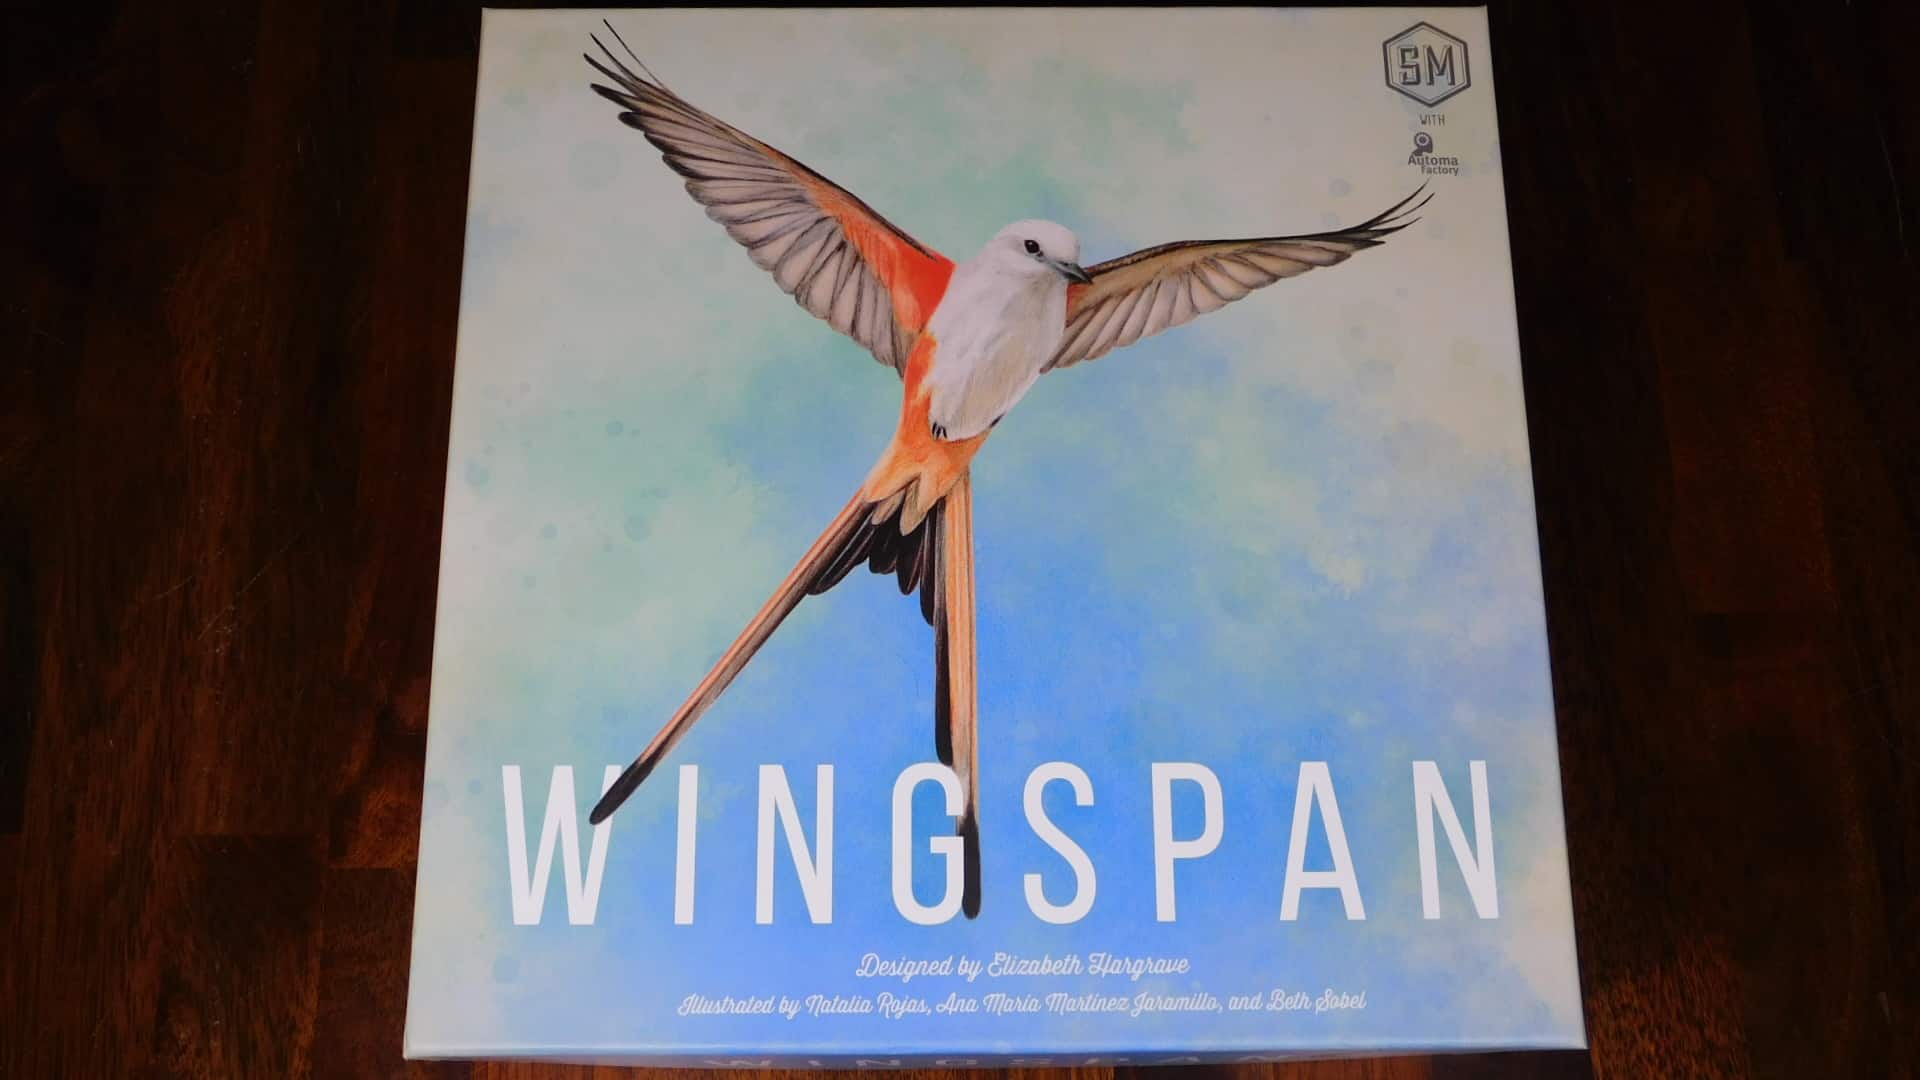 What Is A Board Game With Birds?